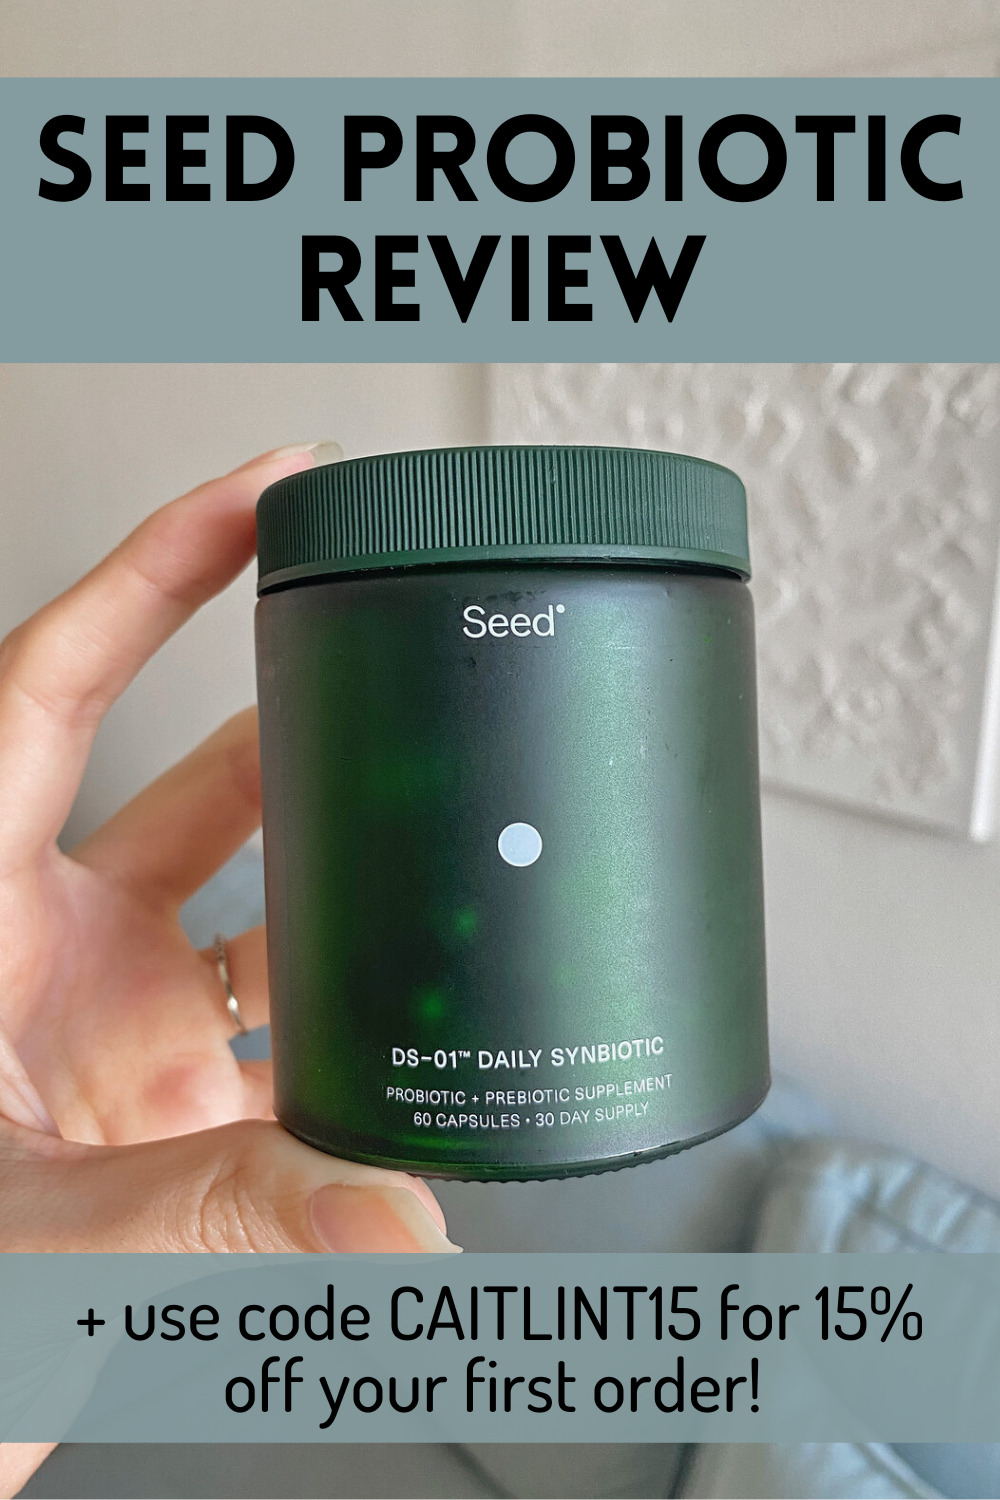 Seed Probiotic Review